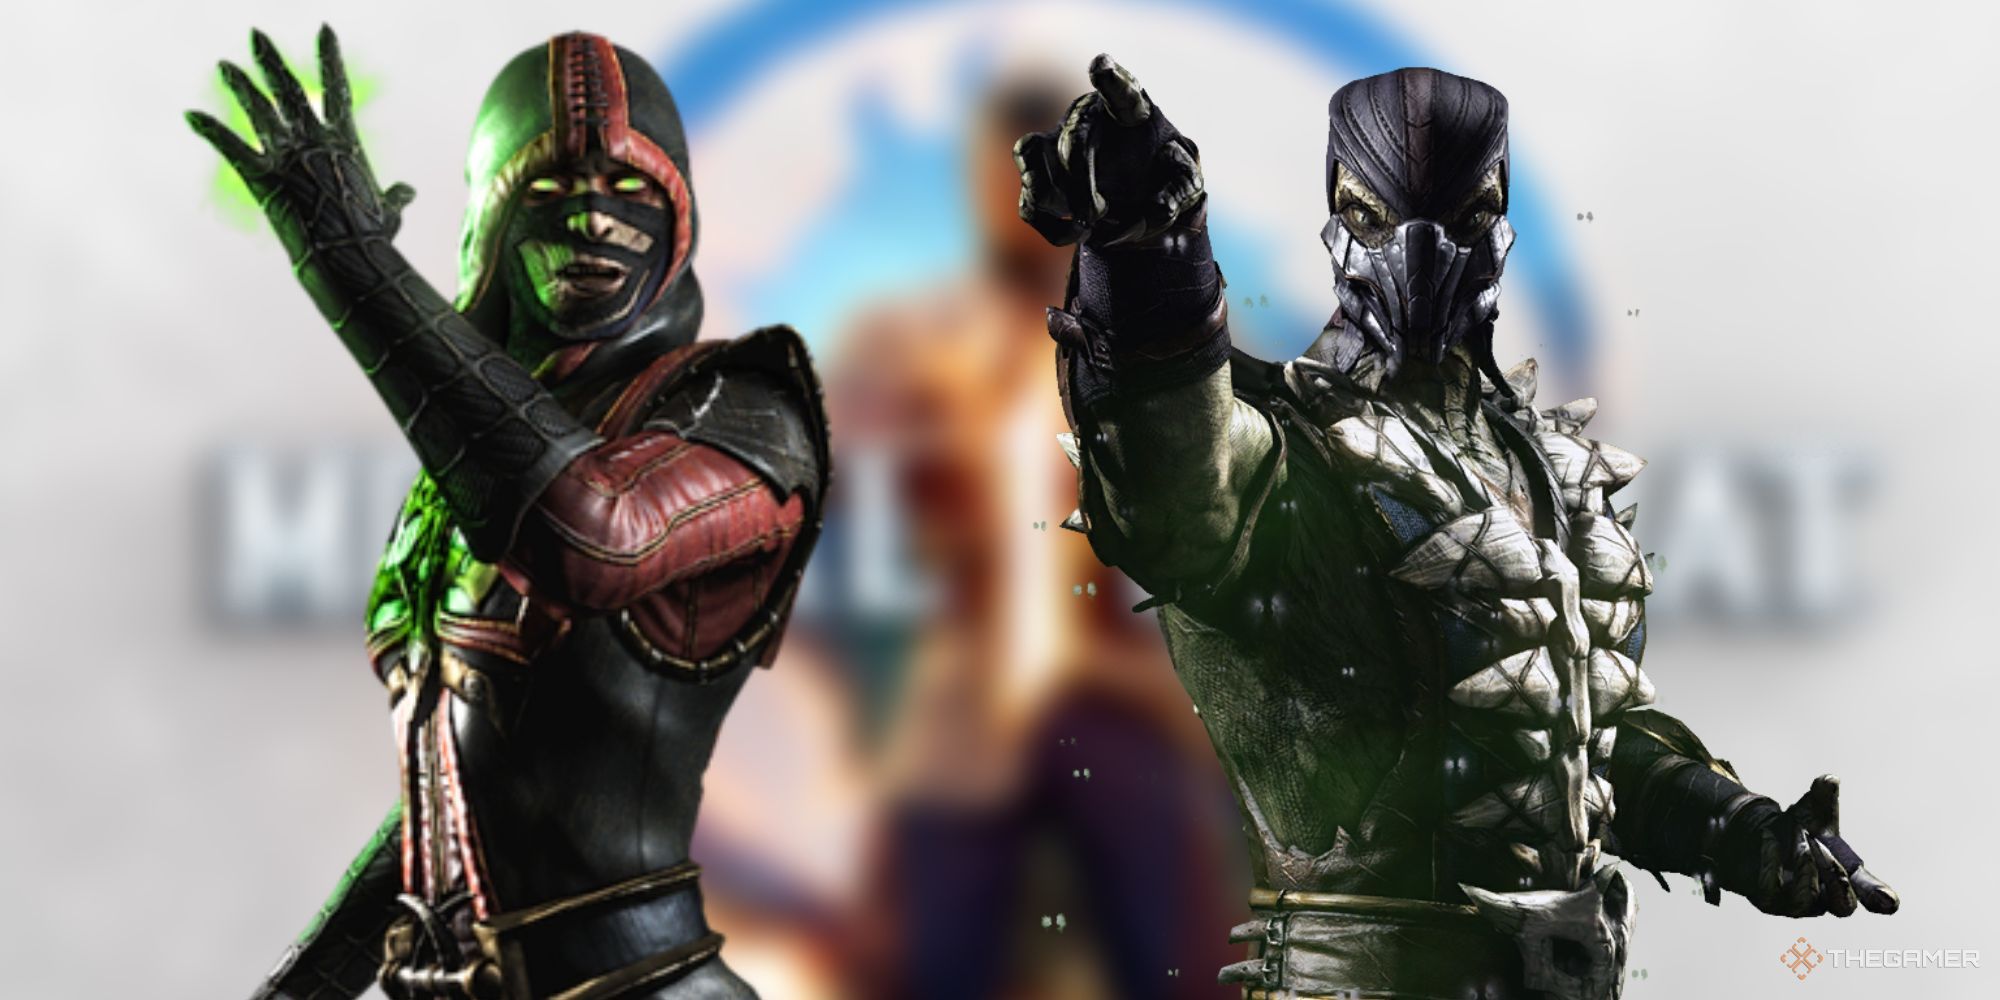 ermac and fight